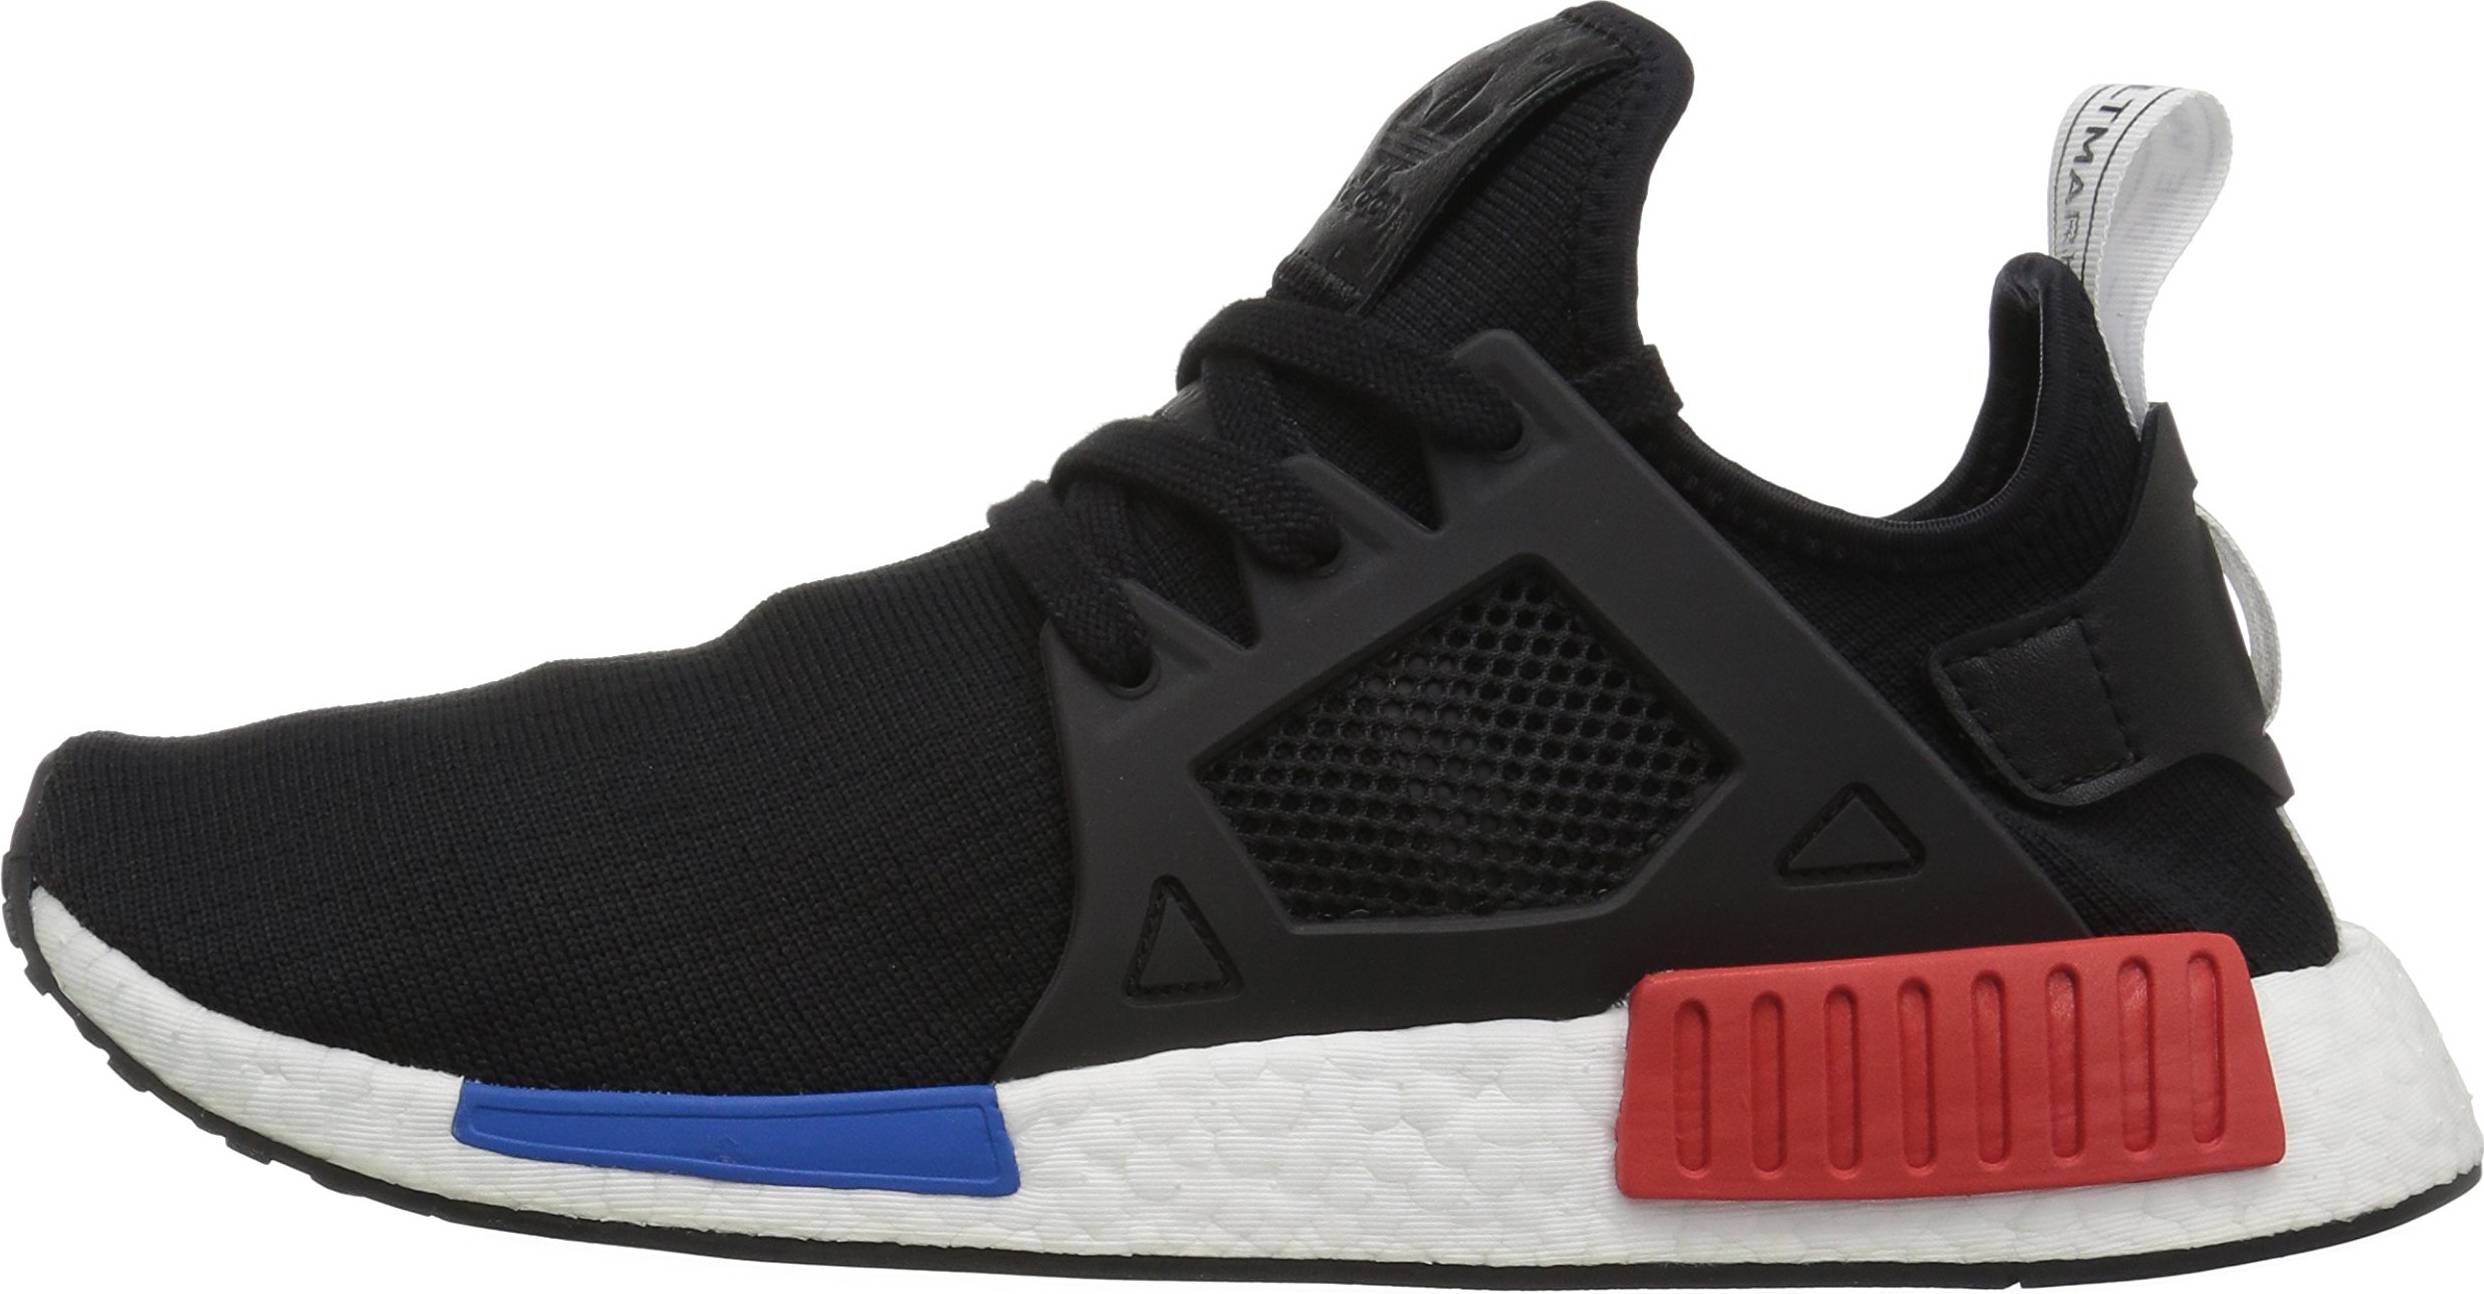 Only $109 + Review of Adidas NMD_XR1 Primeknit | RunRepeat